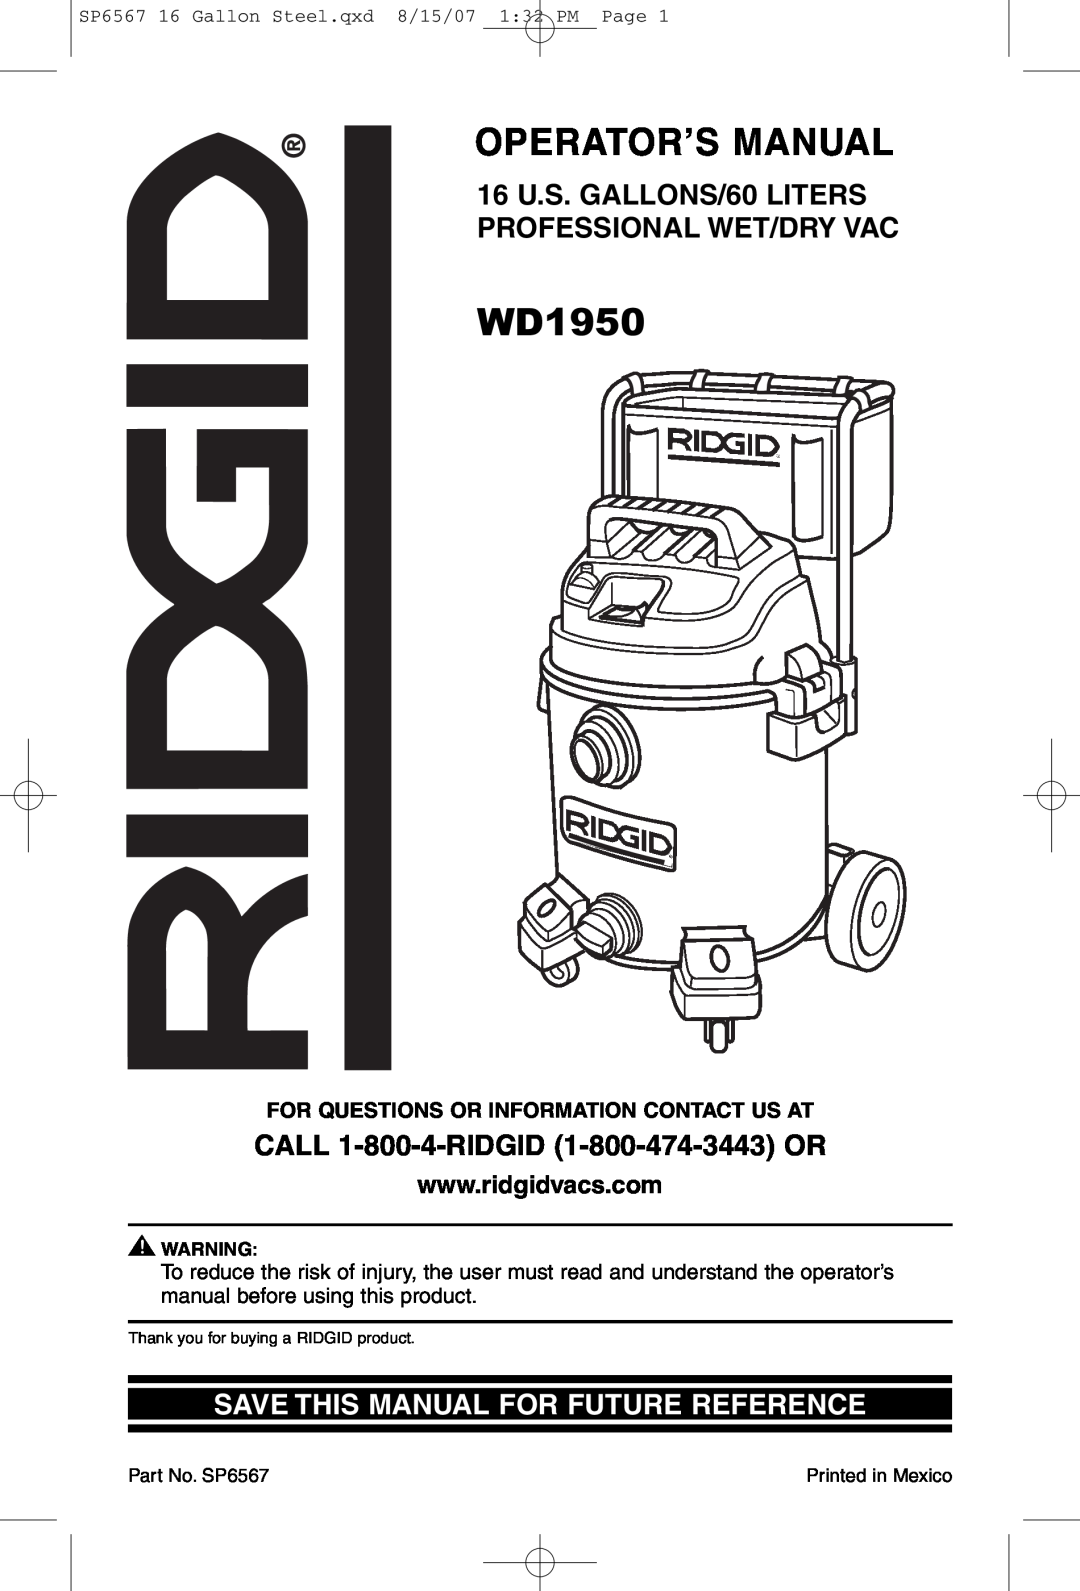 RIDGID WD1950 manual Operator’S Manual, CALL 1-800-4-RIDGID 1-800-474-3443OR, Save This Manual For Future Reference 